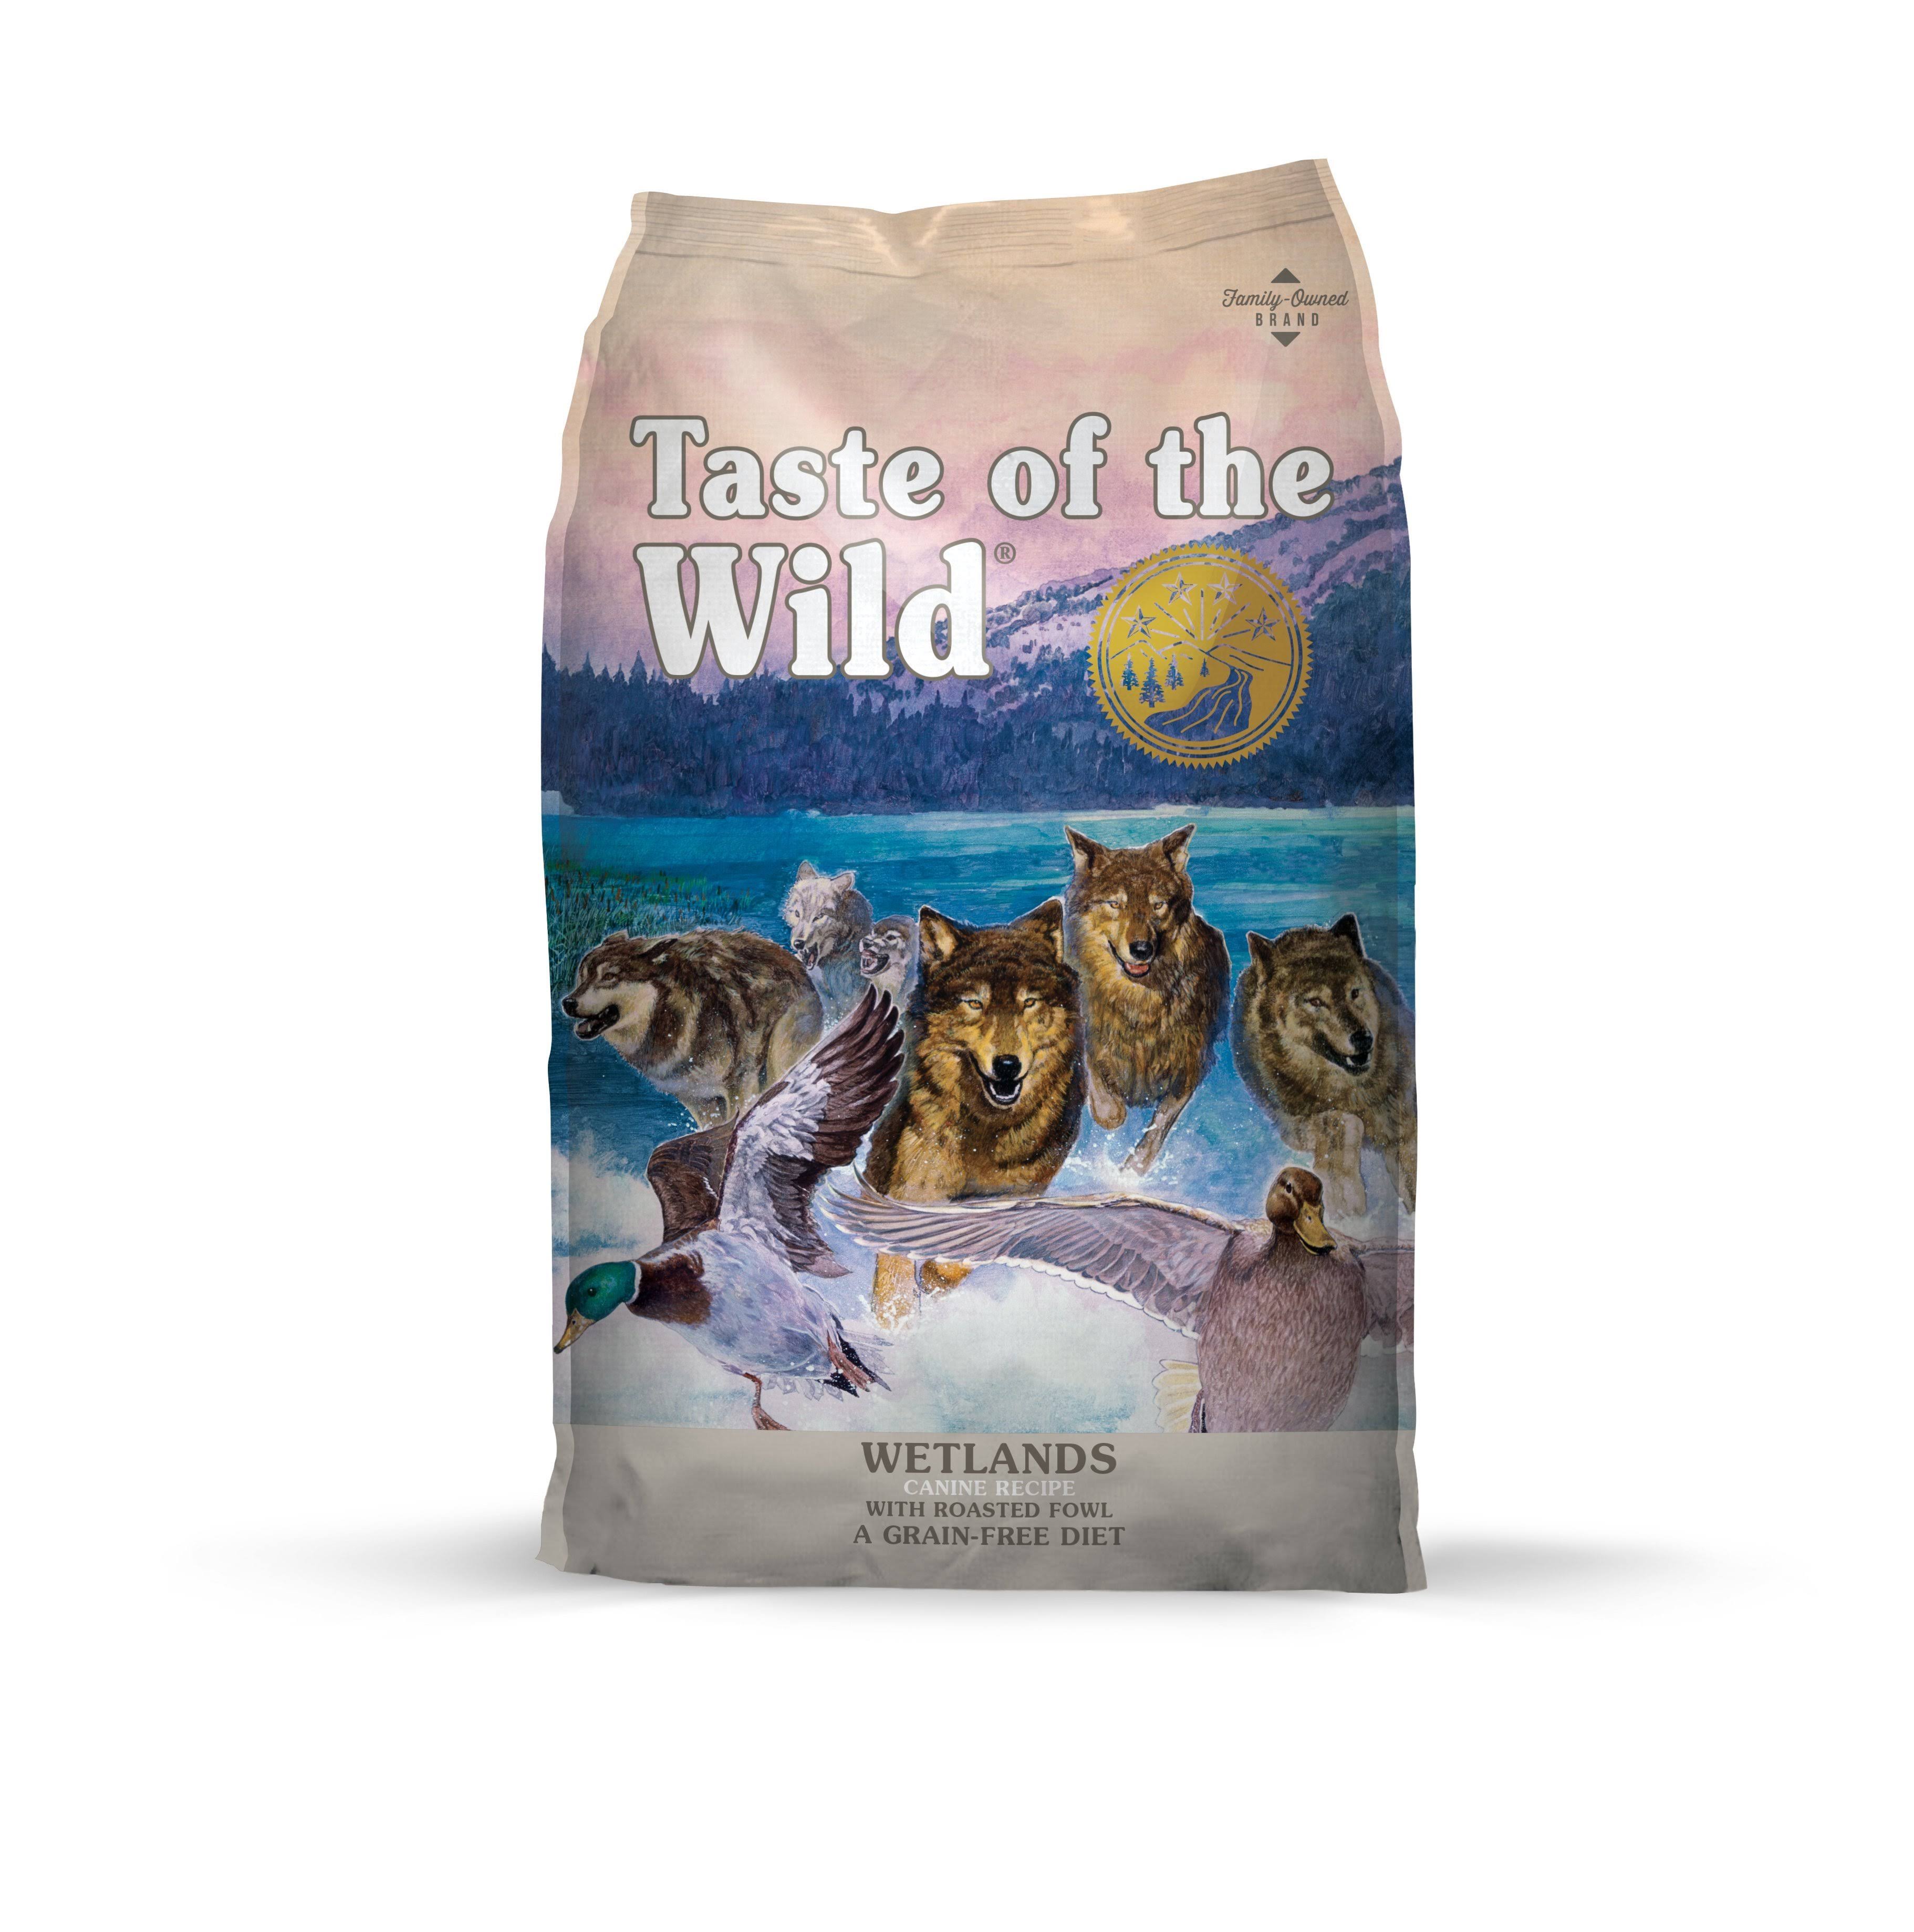 Taste of the Wild Wetlands with Roasted Fowl Dog Food [14lb]